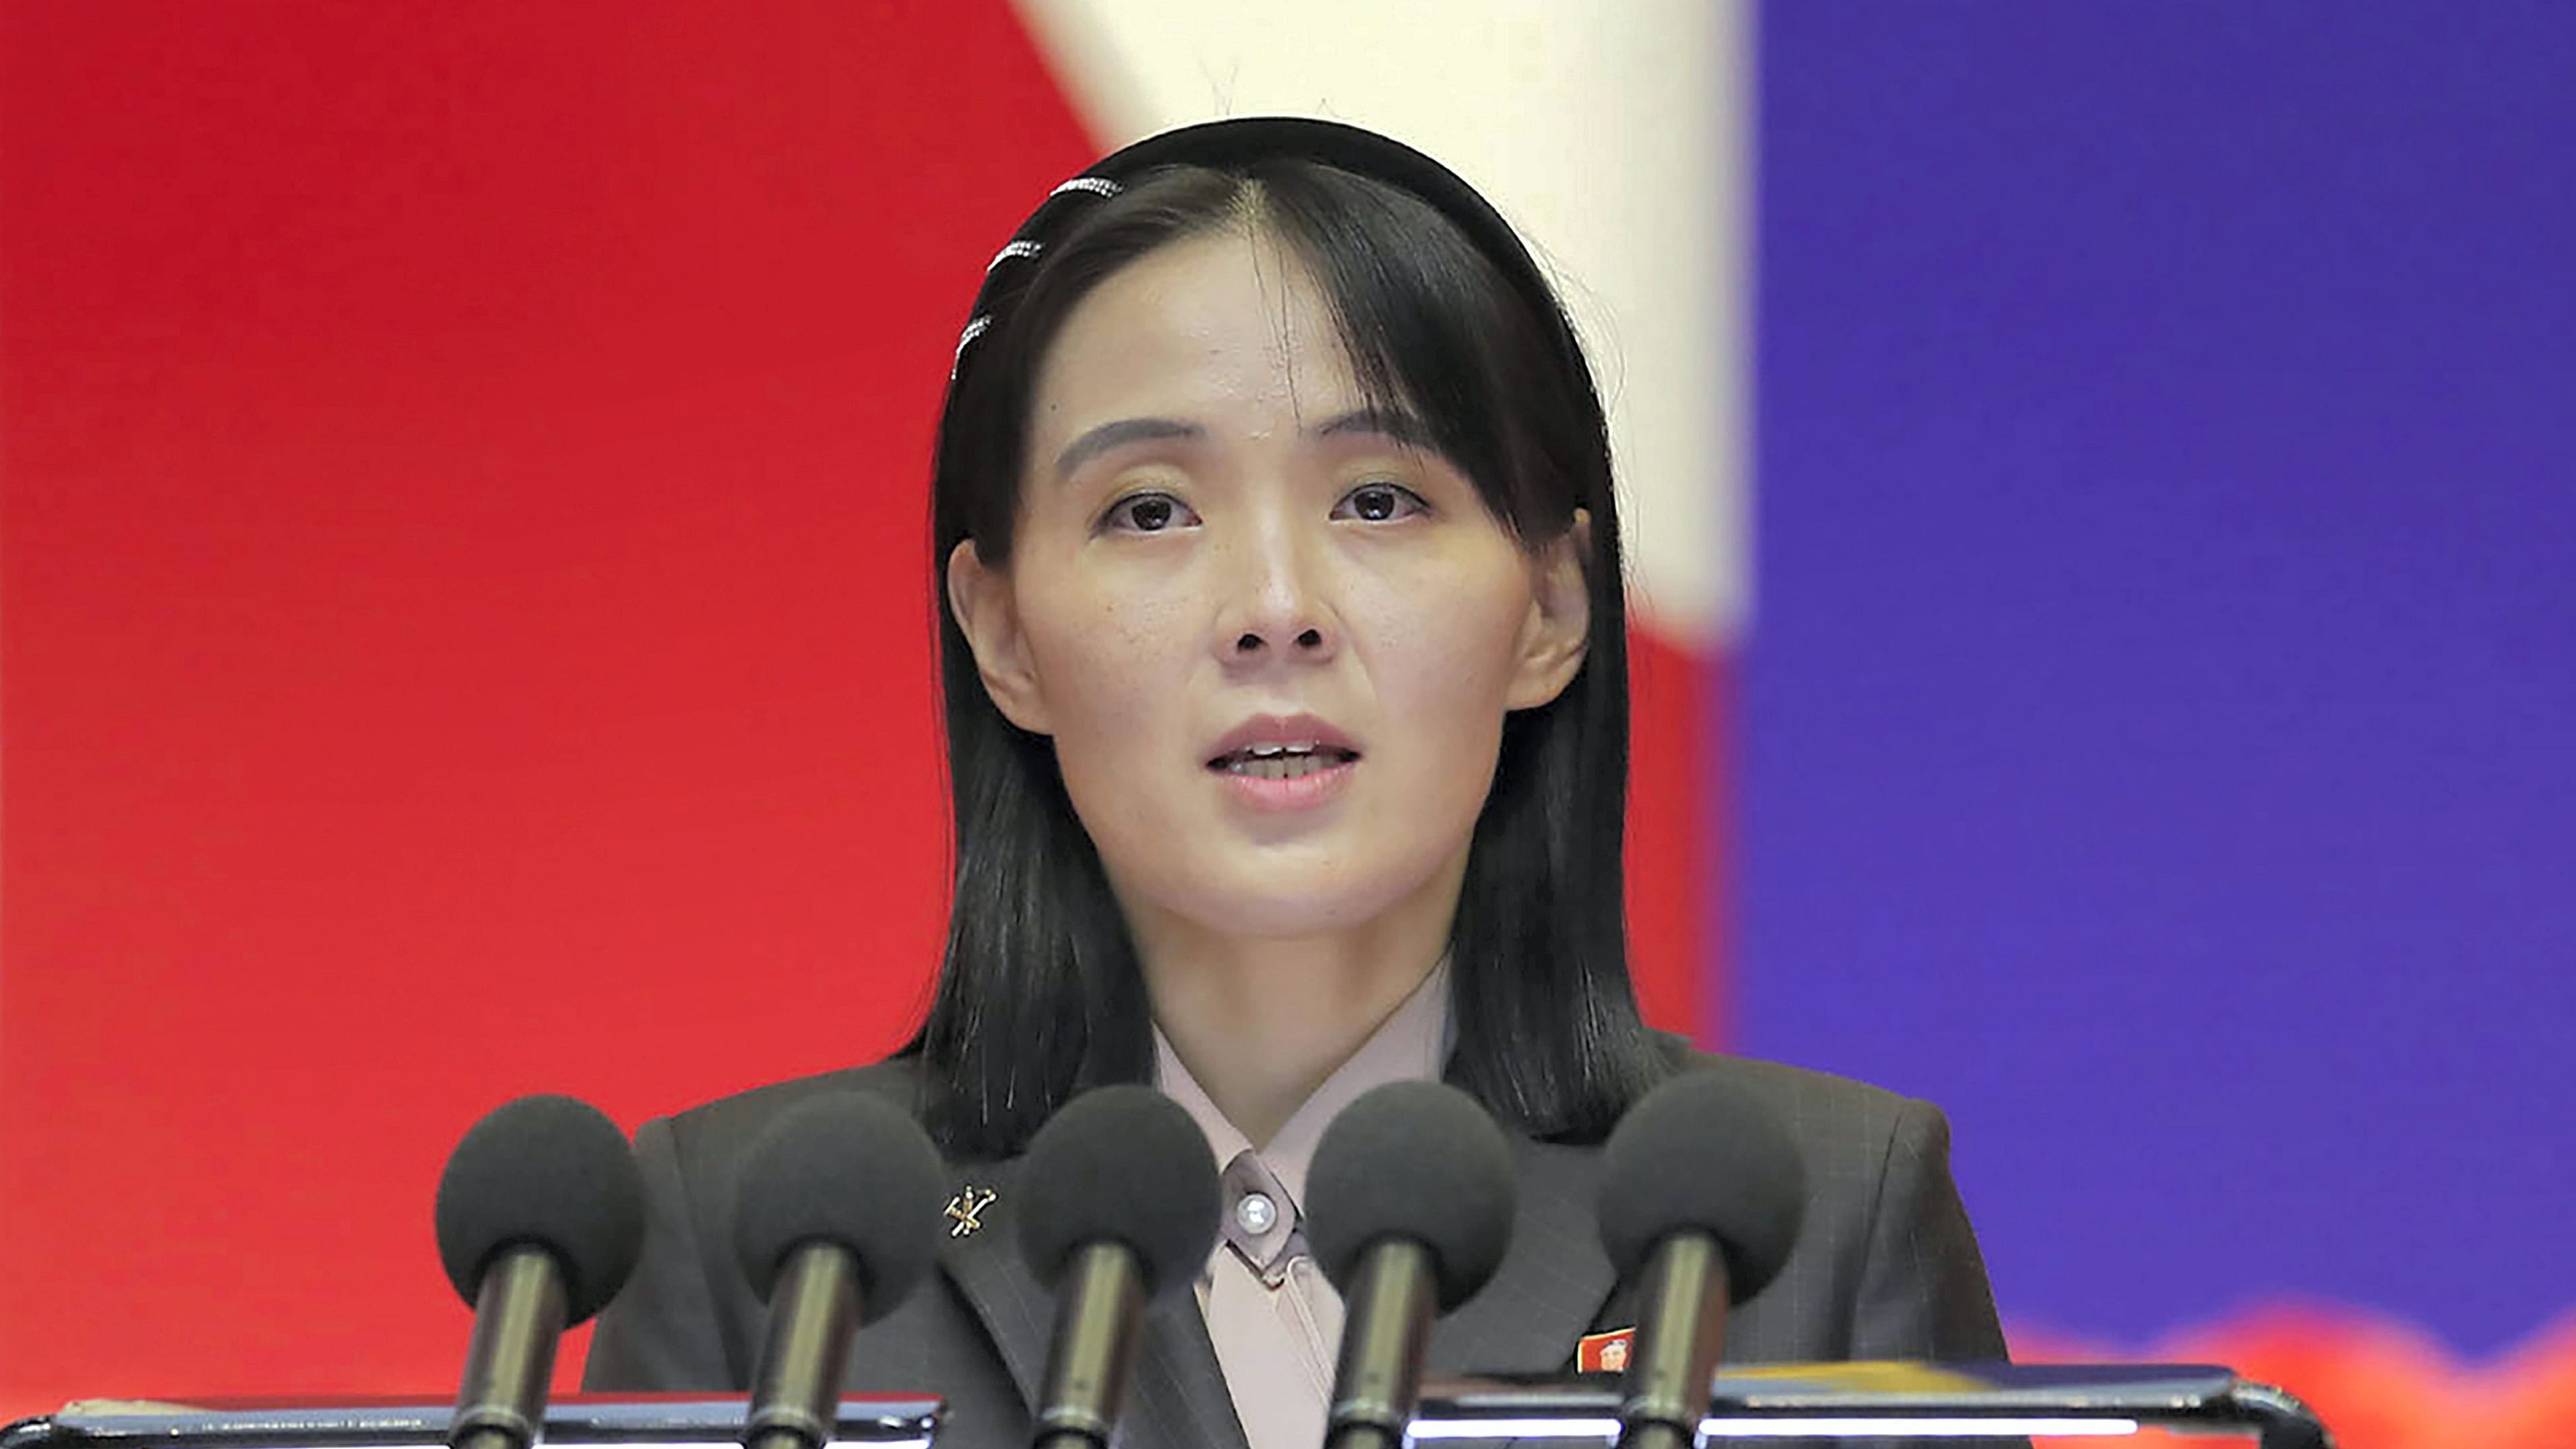 Kim Yo Jong, who is widely considered North Korea's second most powerful person after her brother, lambasted the United States for issuing what she called “a disgusting joint statement together with such rabbles as Britain, France, Australia, Japan and South Korea”. Credit: AP Photo